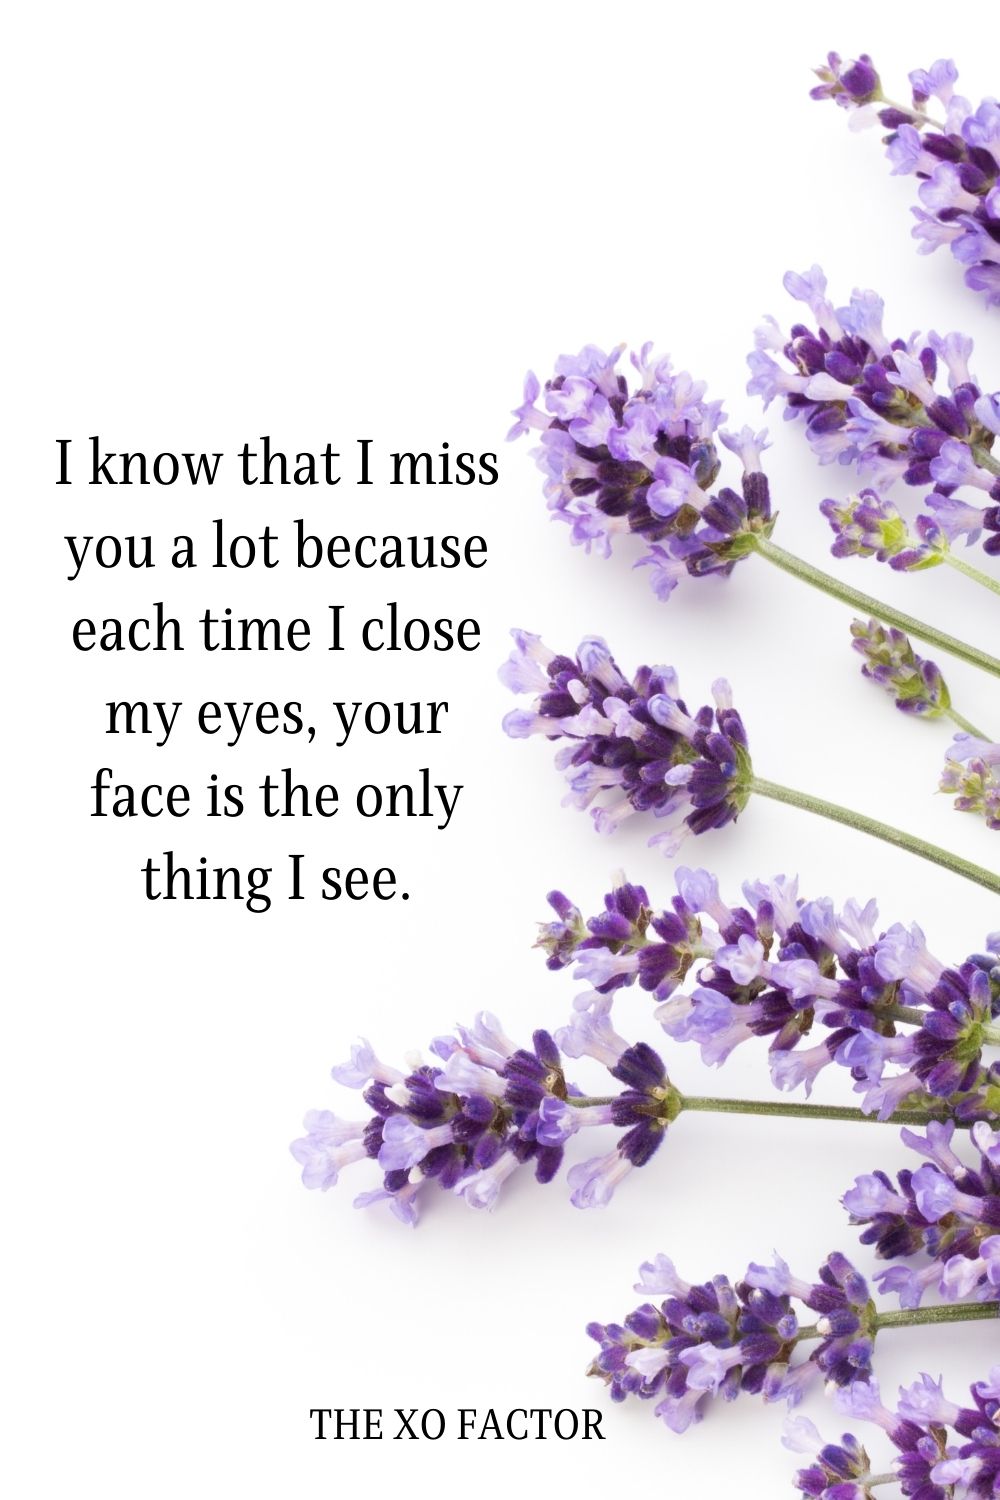 I know that I miss you a lot because each time I close my eyes, your face is the only thing I see.